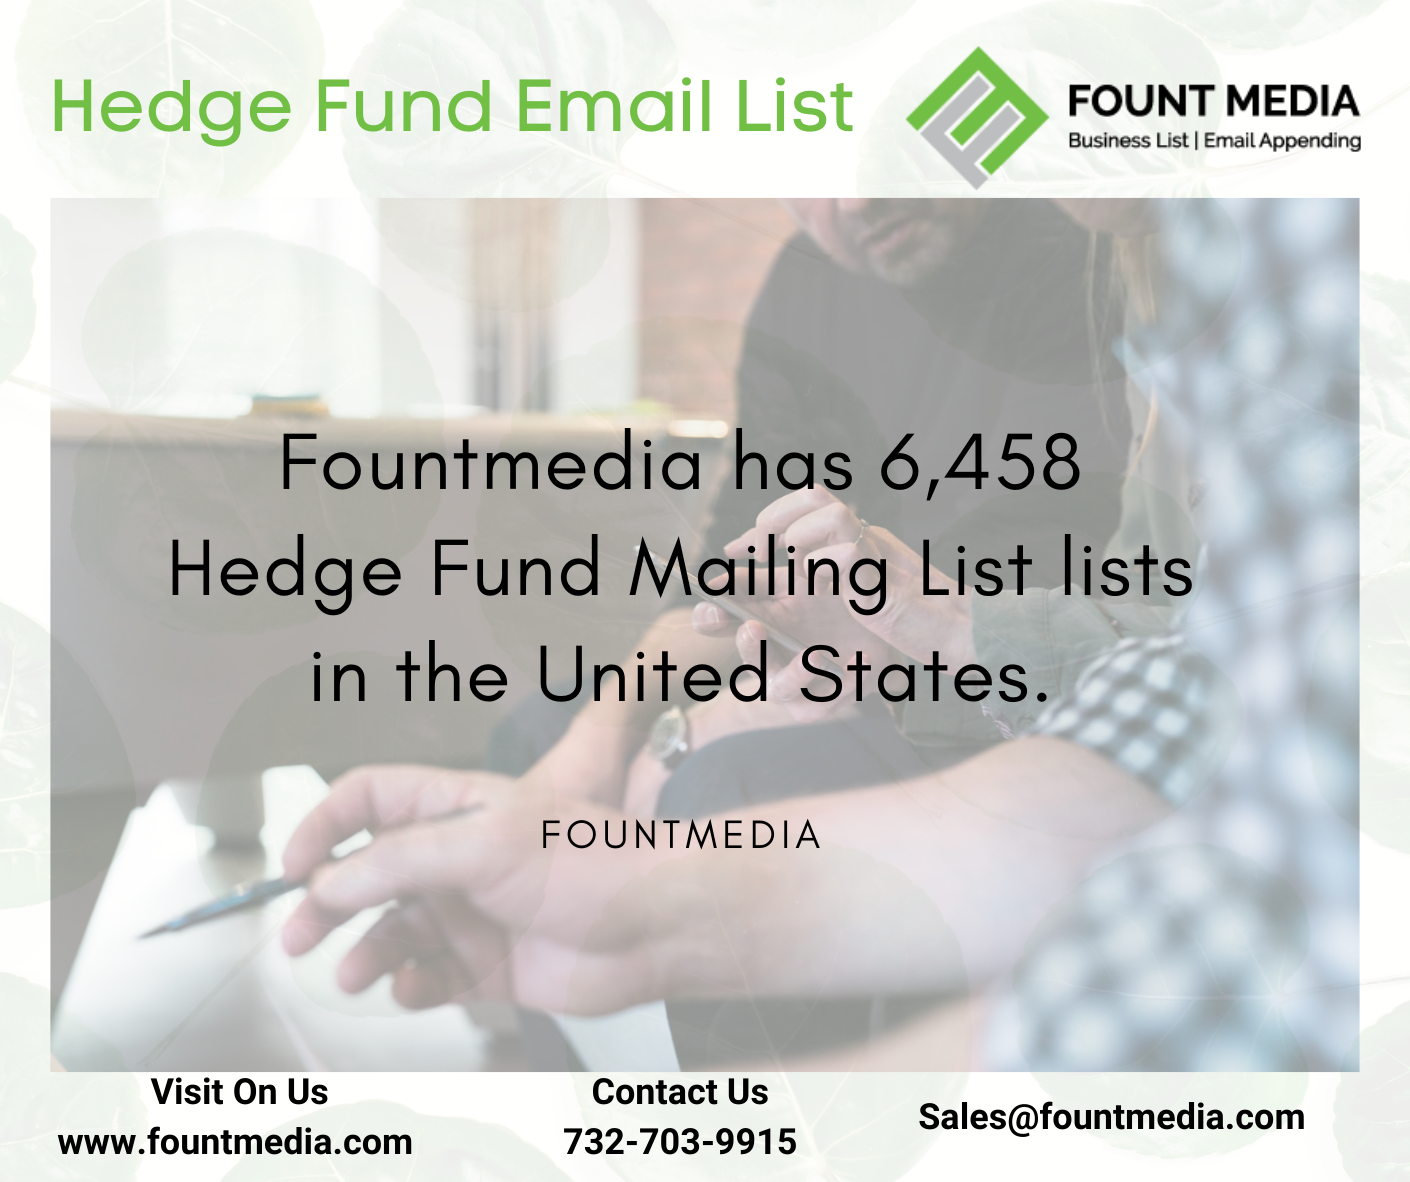 Hedge Fund Email List | List of Hedge Fund Mailing Database